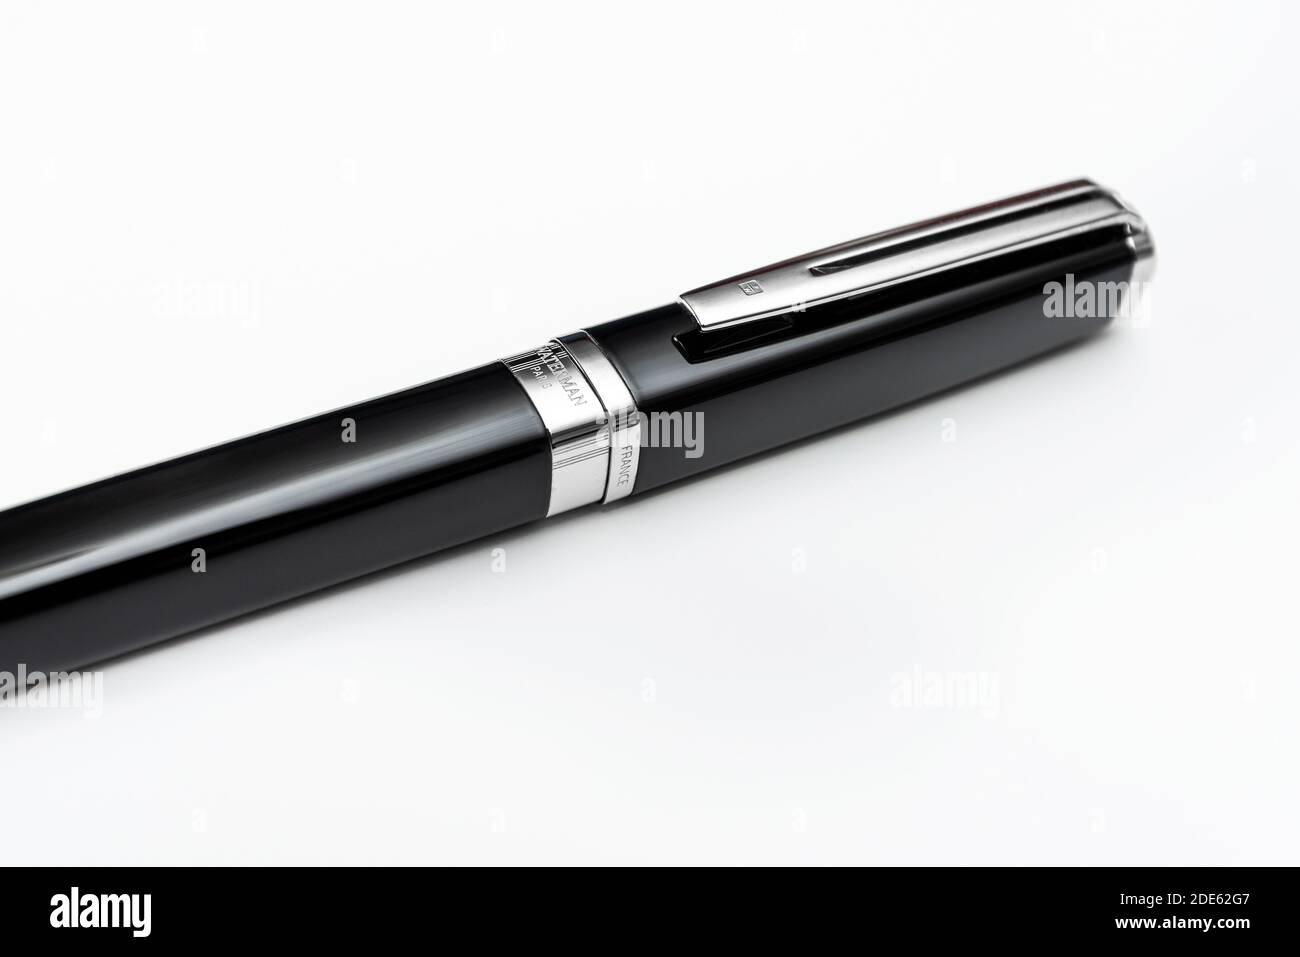 Quebec, Canada - Jauary 6th, 2017: Close-up of a Waterman pen on an isolated background. Stock Photo